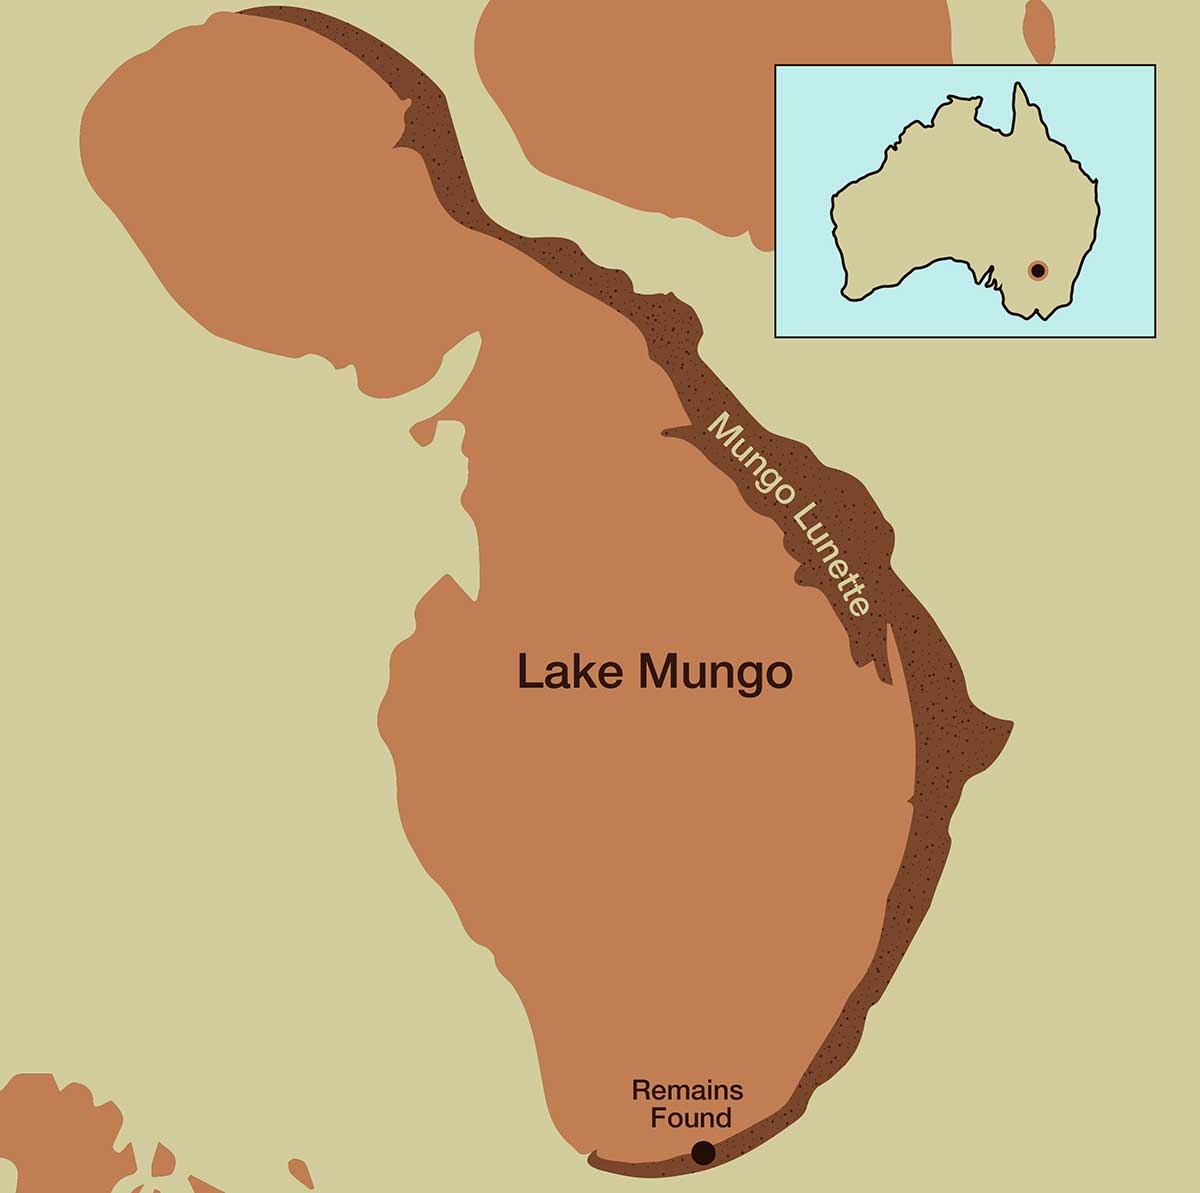 Map of Australia detailing Lake Mungo area and remains found.